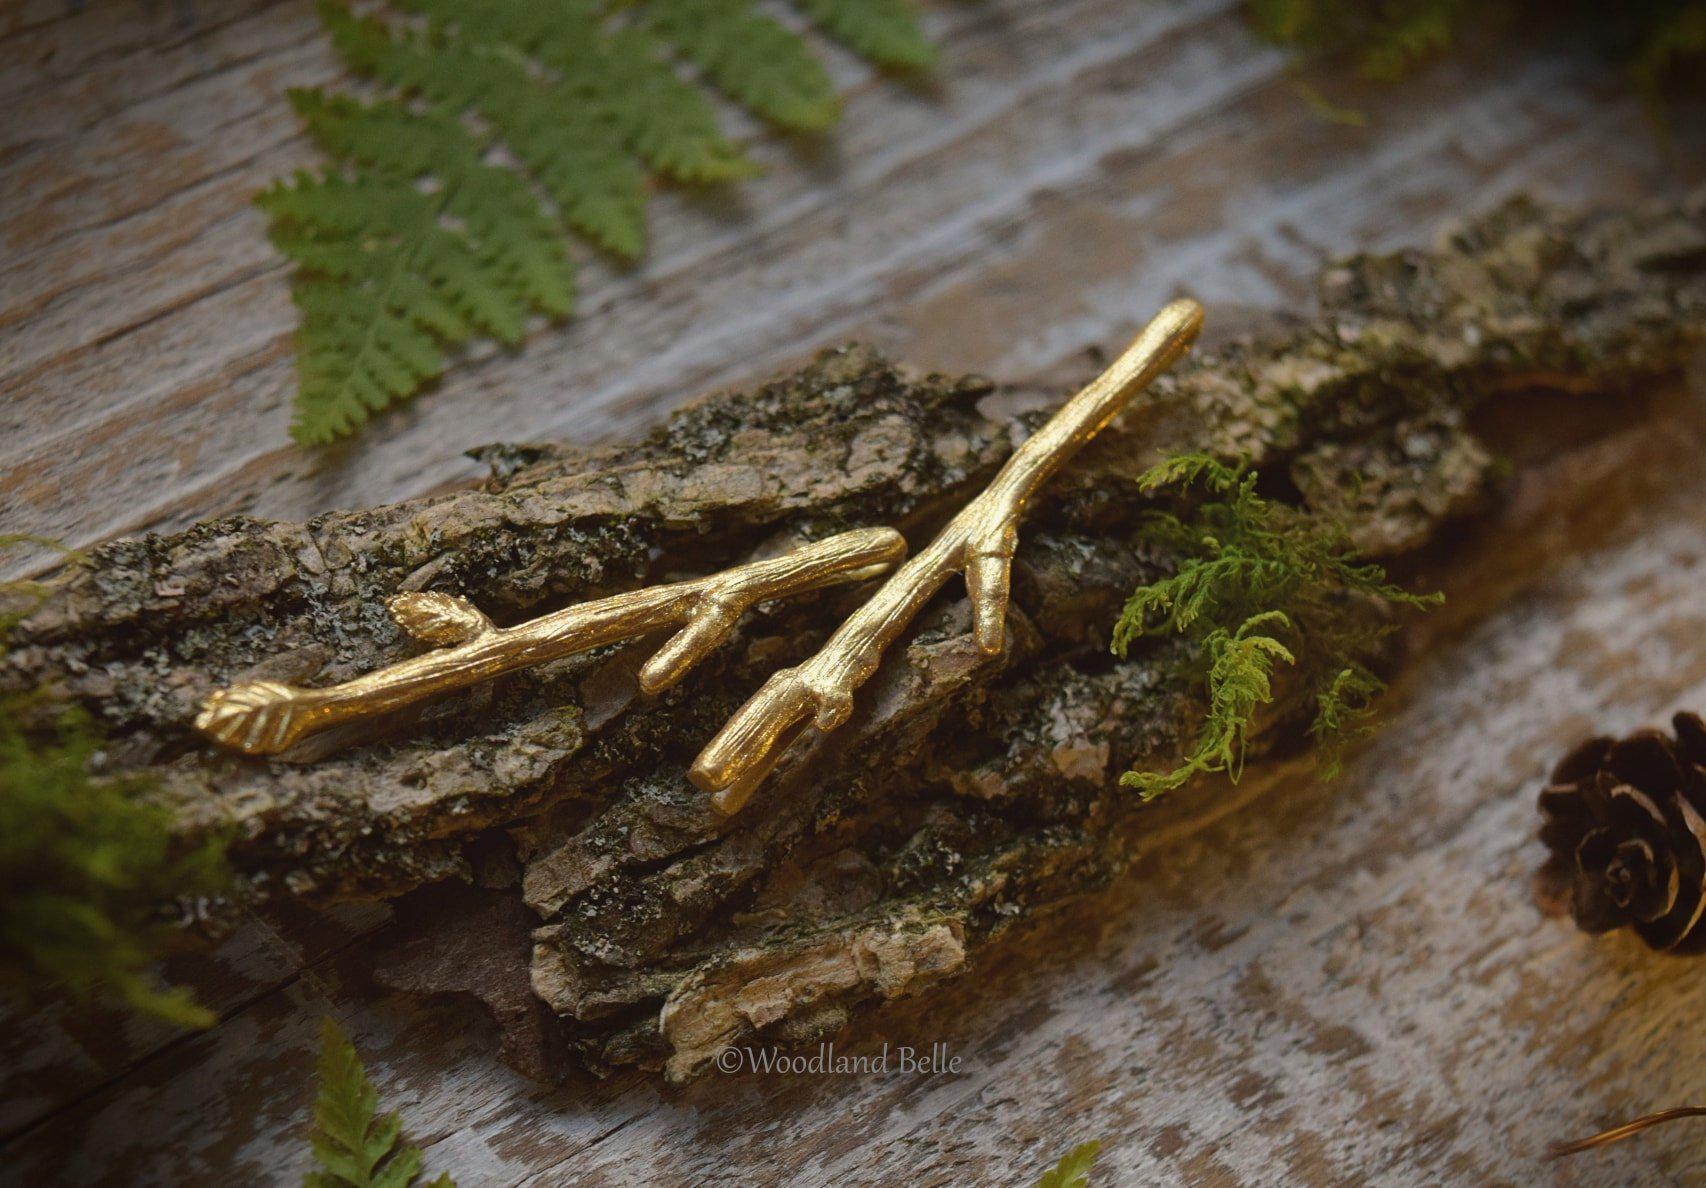 Gold Branch Bobby Pins - Tiny Twig Hair Pins in Golden Bronze - Twig Hair Clips - Mori Girl Style - by Woodland Belle.